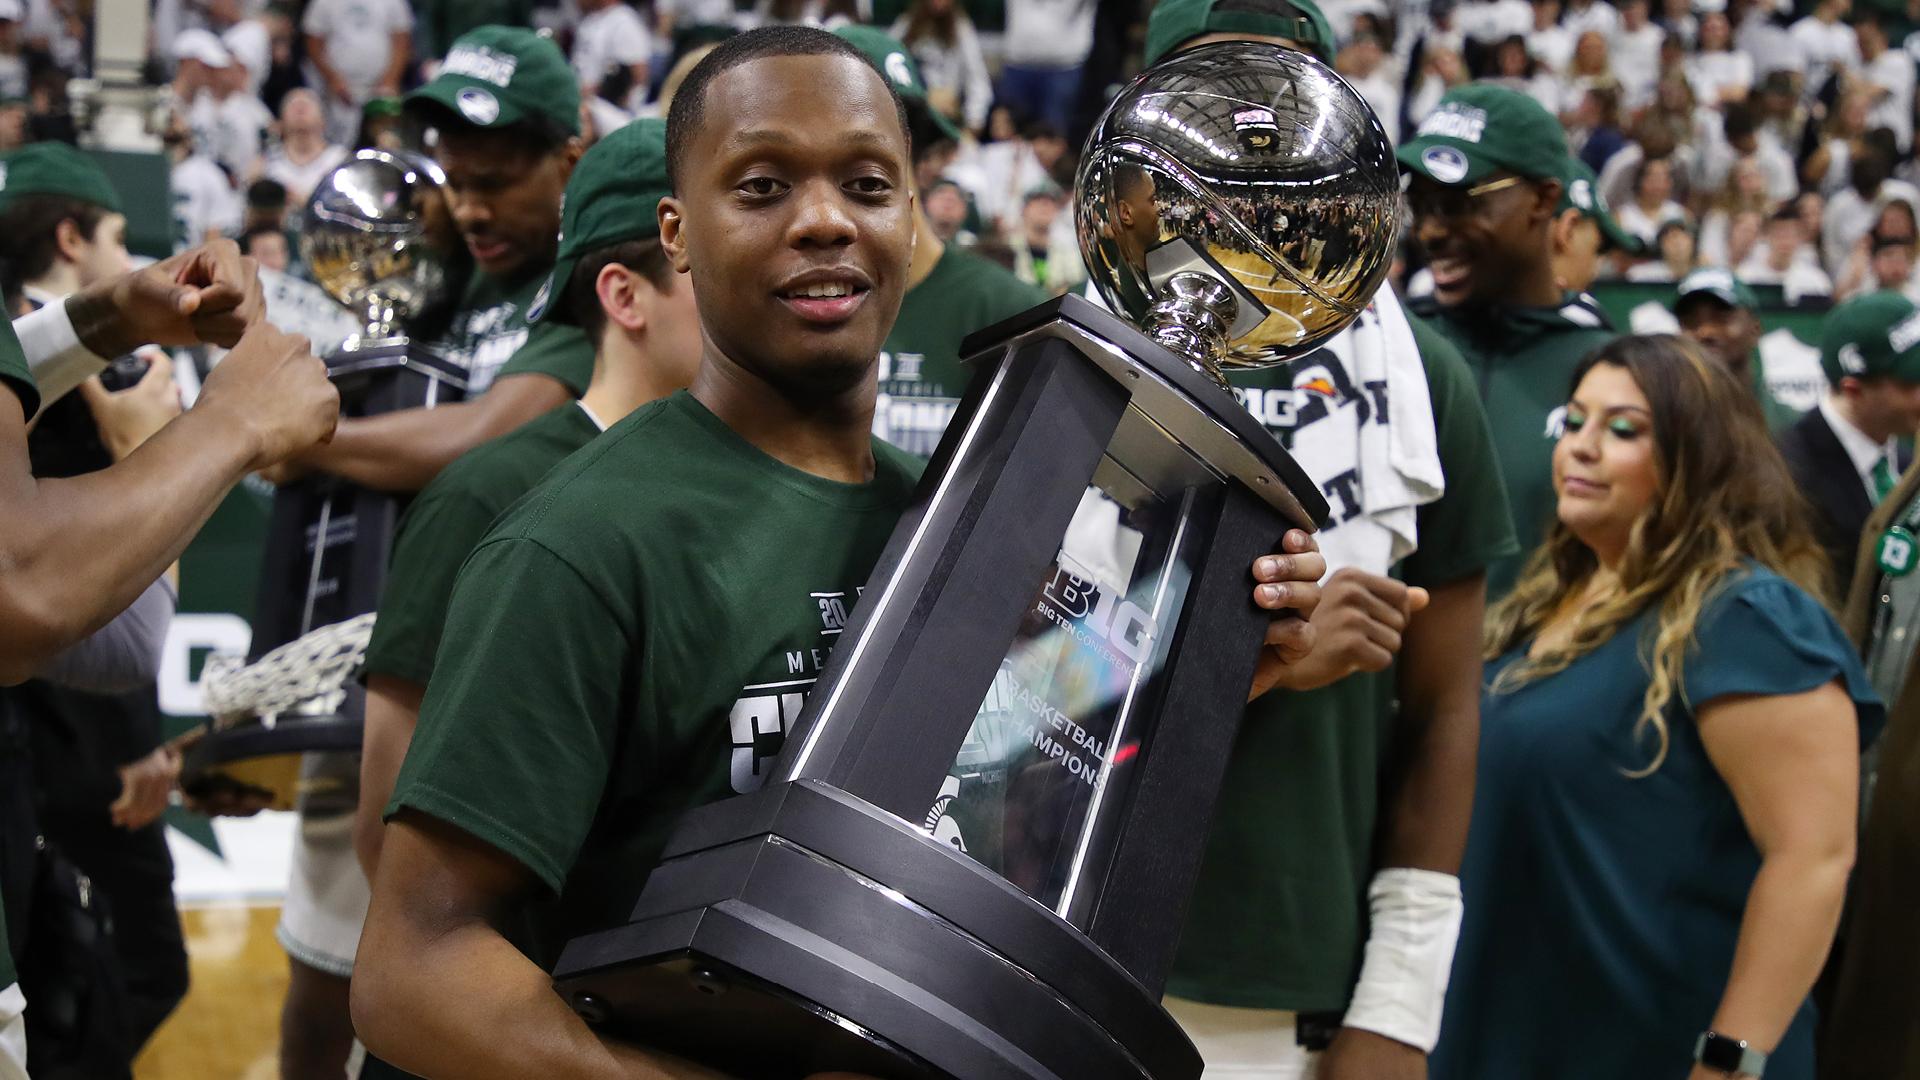 Cassius Winston holding the Holding the 2020 Big Ten Championship trophy